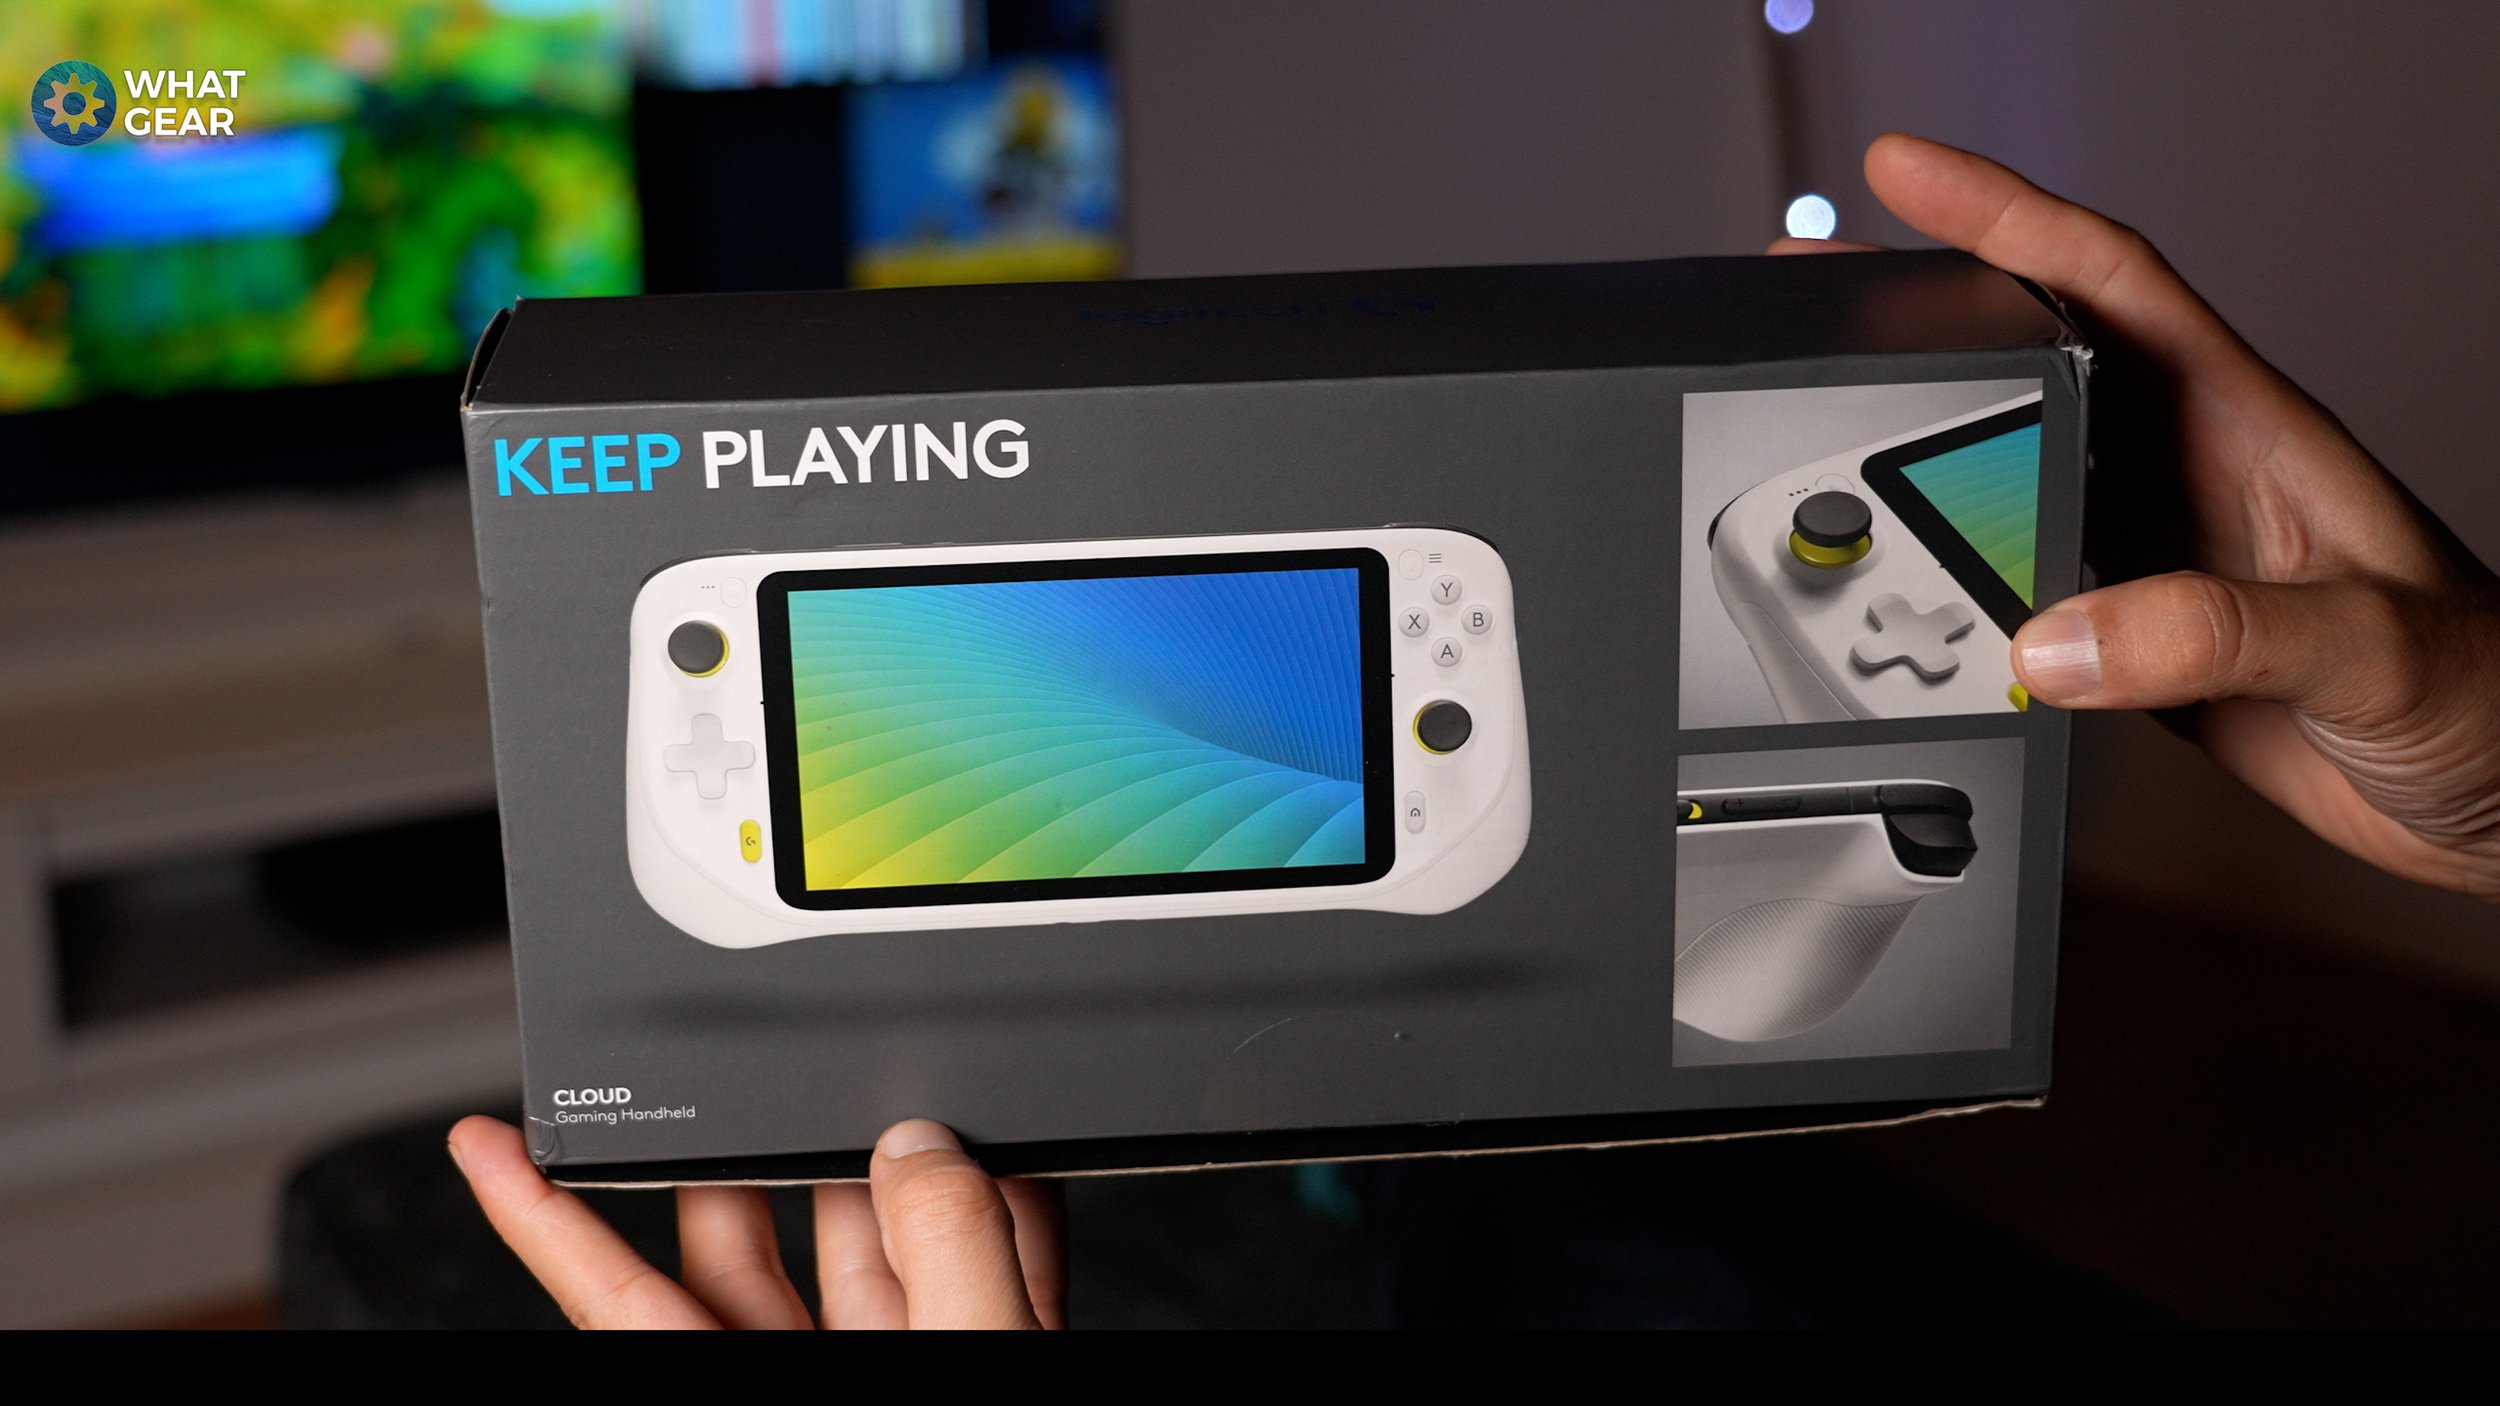 Logitech announces Xbox Cloud Gaming and GeForce Now handheld